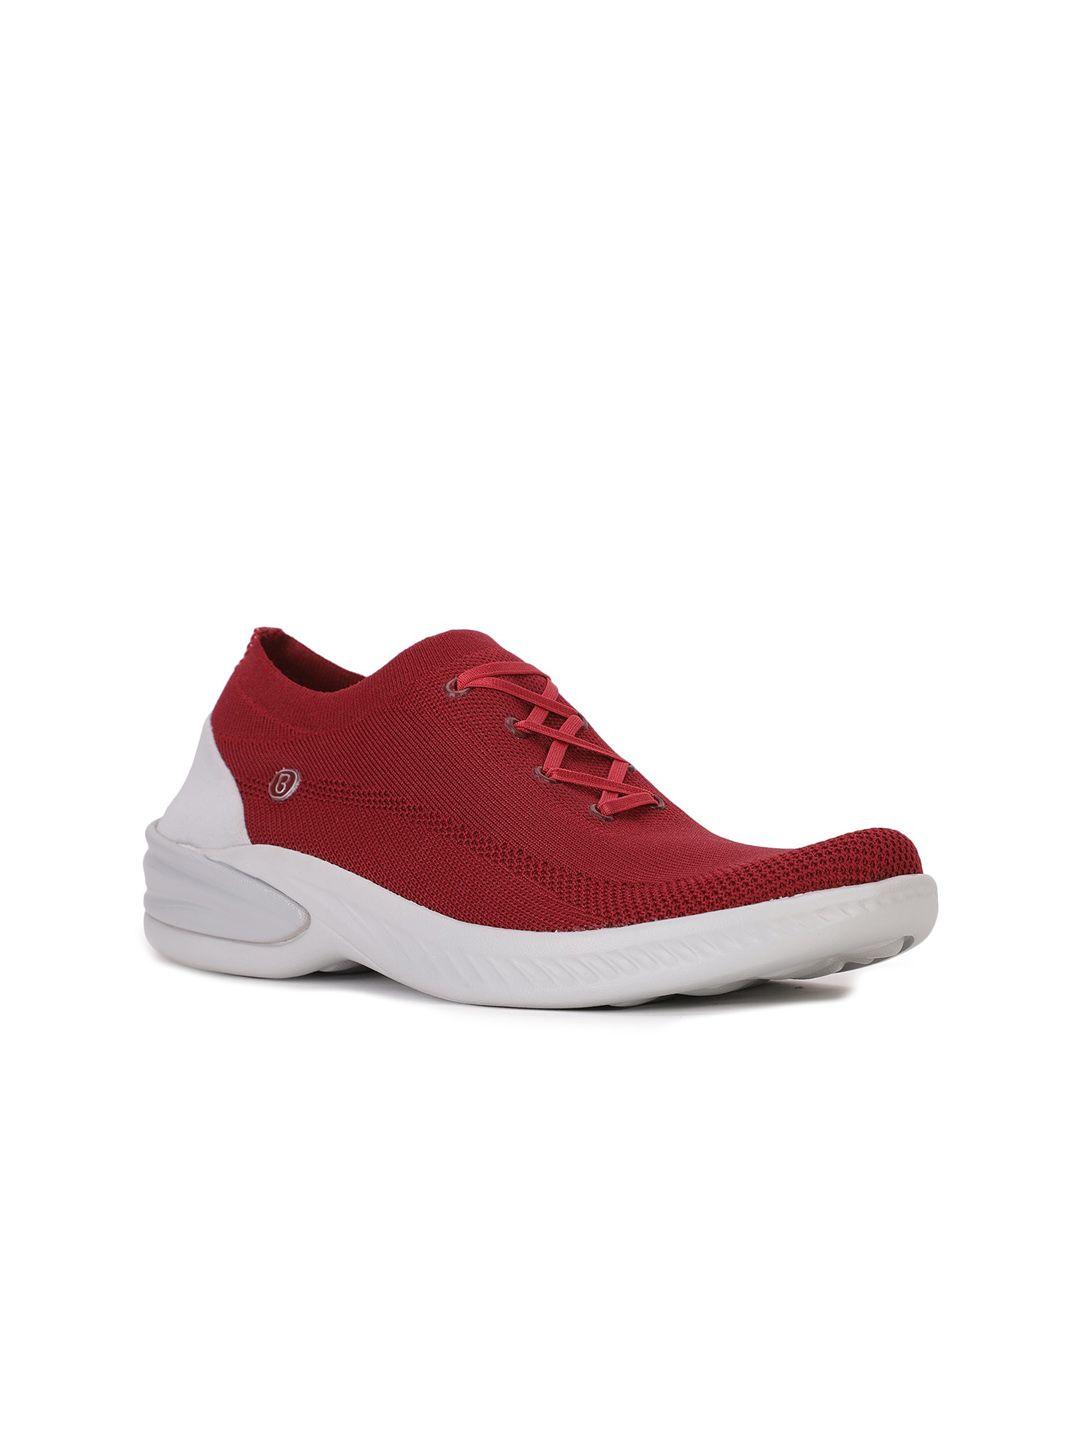 naturalizer women red woven design pu slip-on sneakers